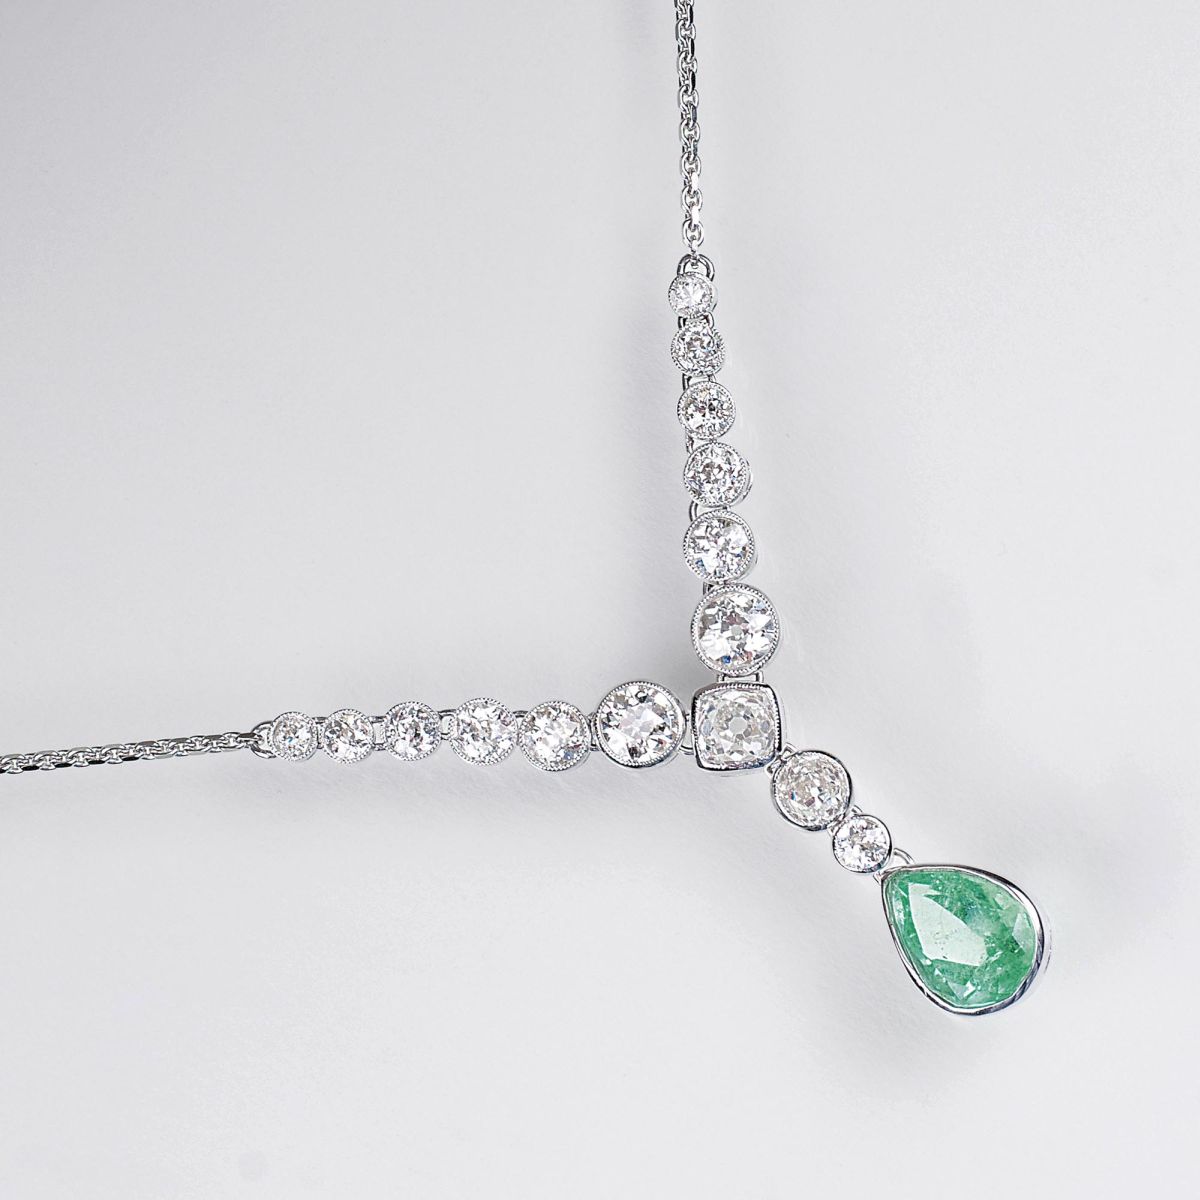 An Emerald Pendant with Old European Cut Diamonds on Necklace